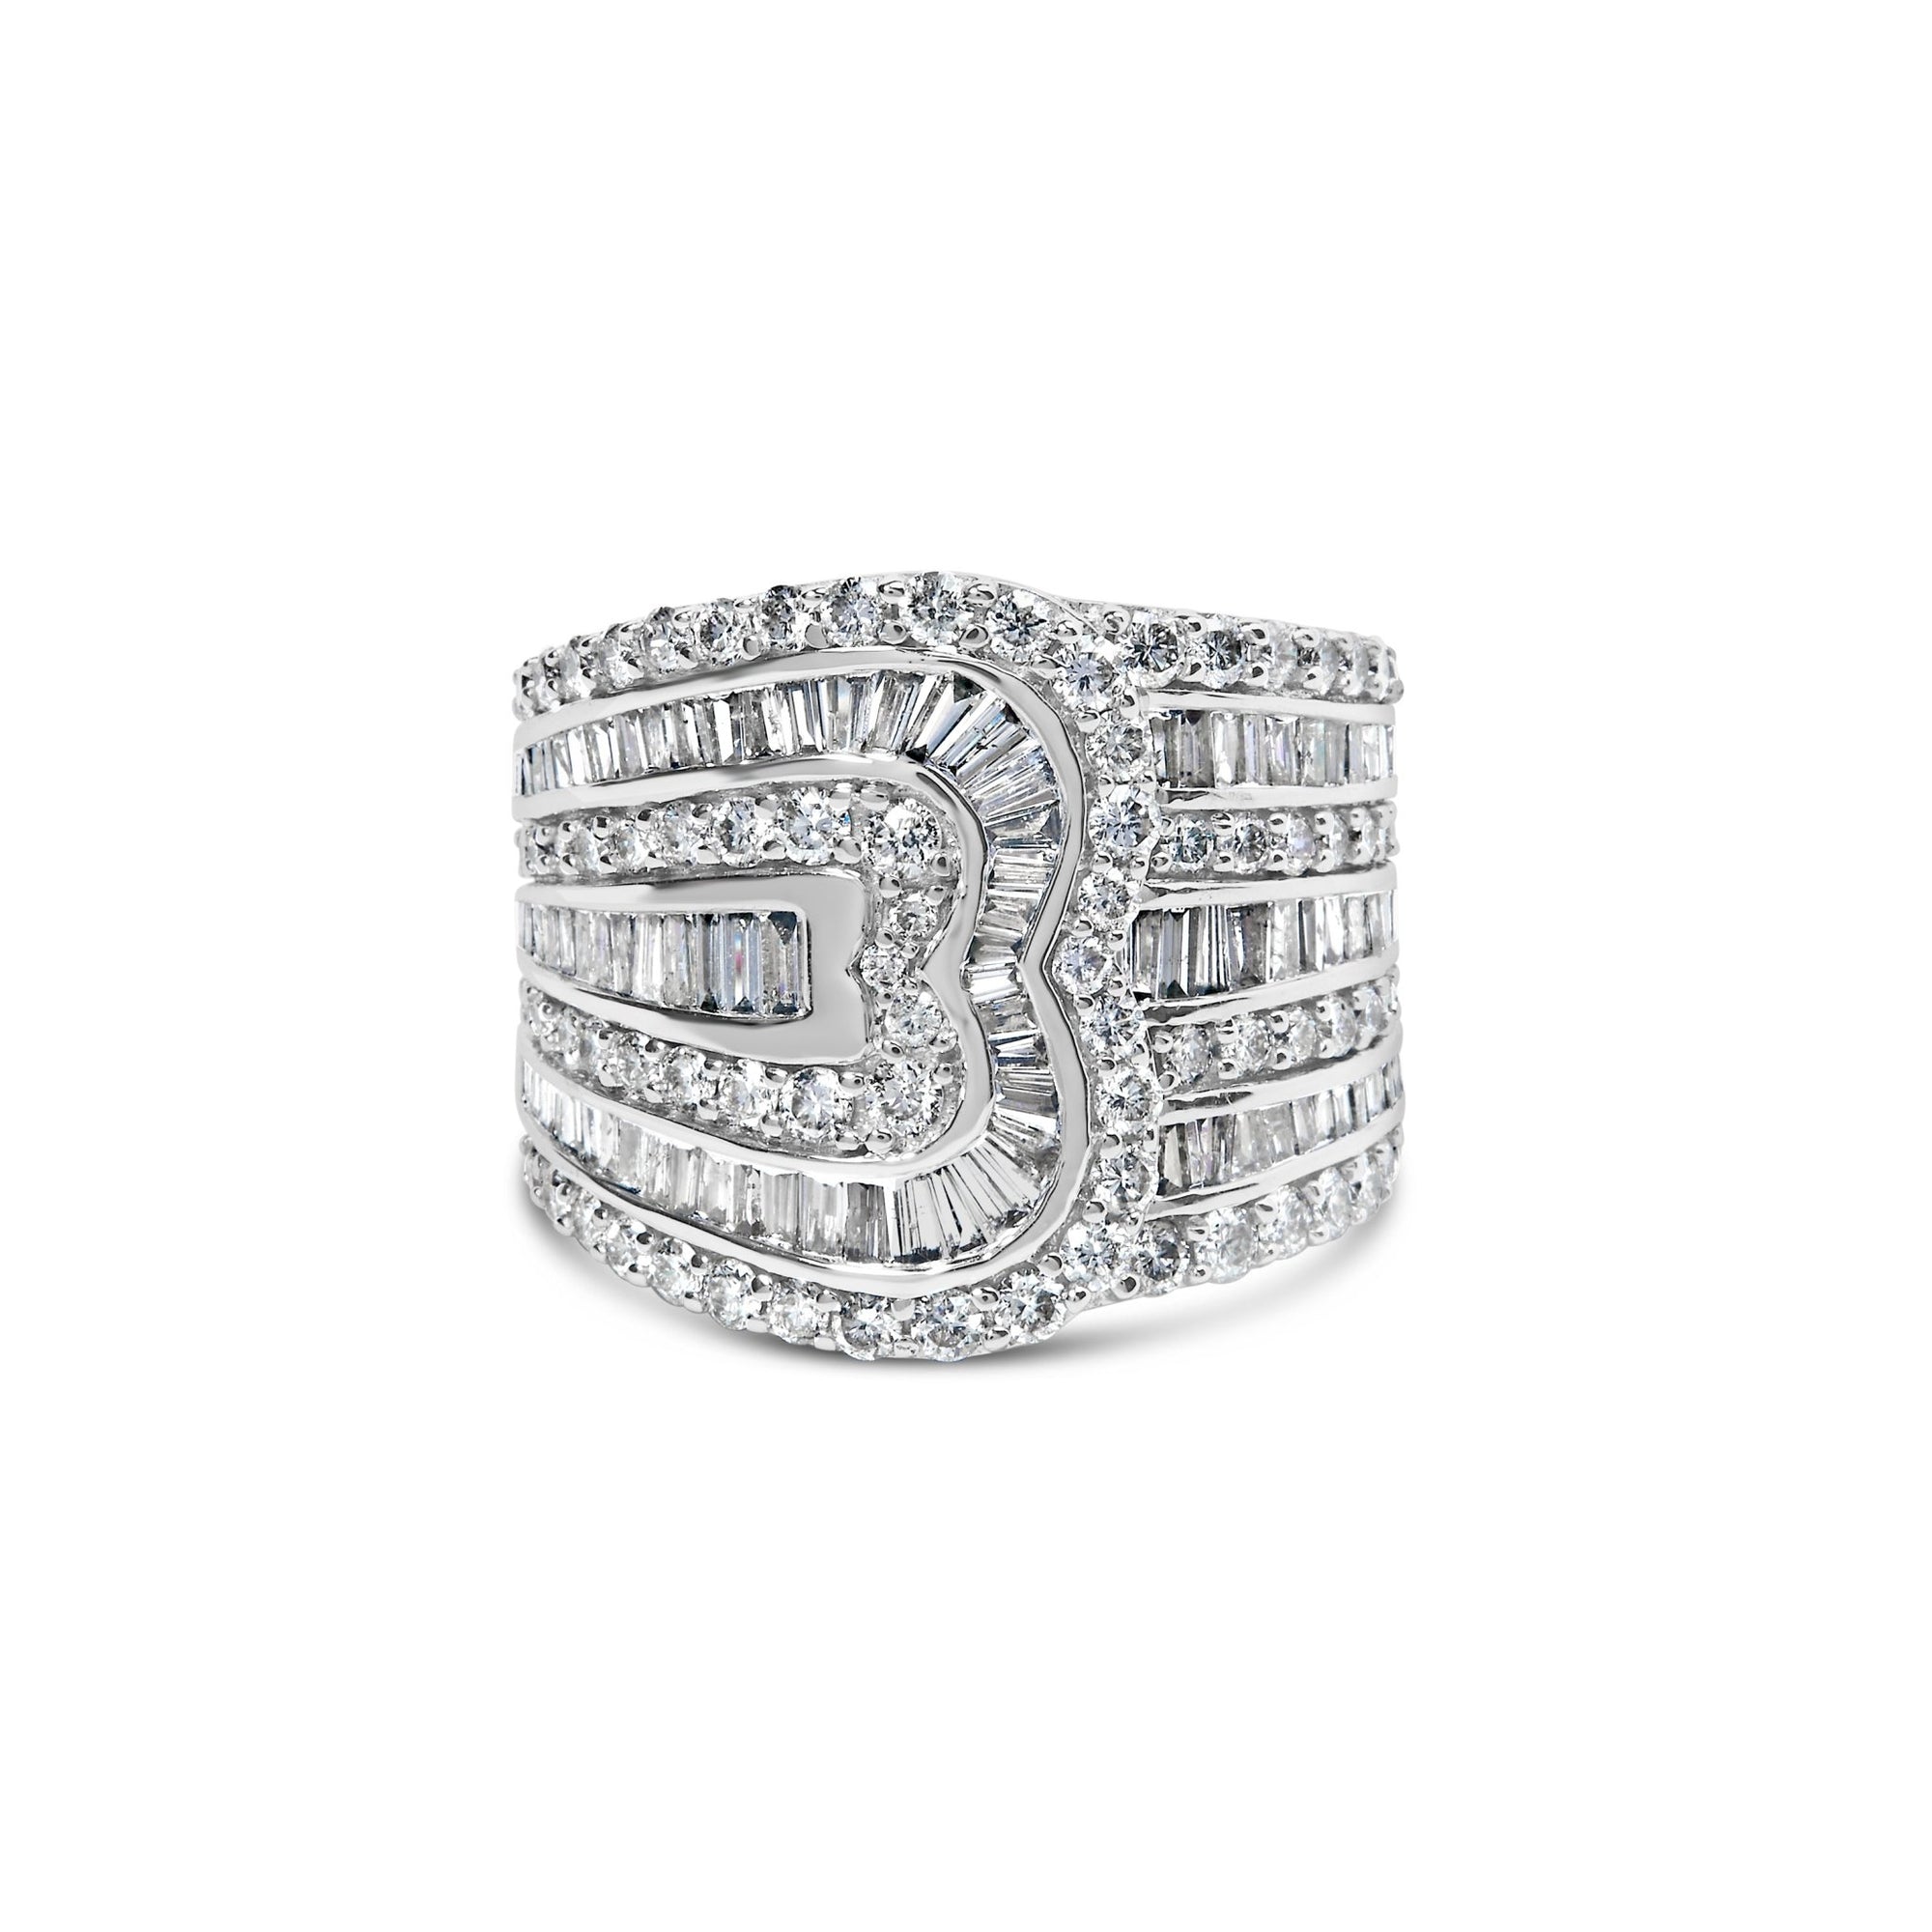 10K White Gold 2 1/2 Cttw Round and Baguette-Cut Diamond Multi-Row Bypass Ring (J-K Color, I2-I3 Clarity) - Ring Size 7 - LinkagejewelrydesignLinkagejewelrydesign